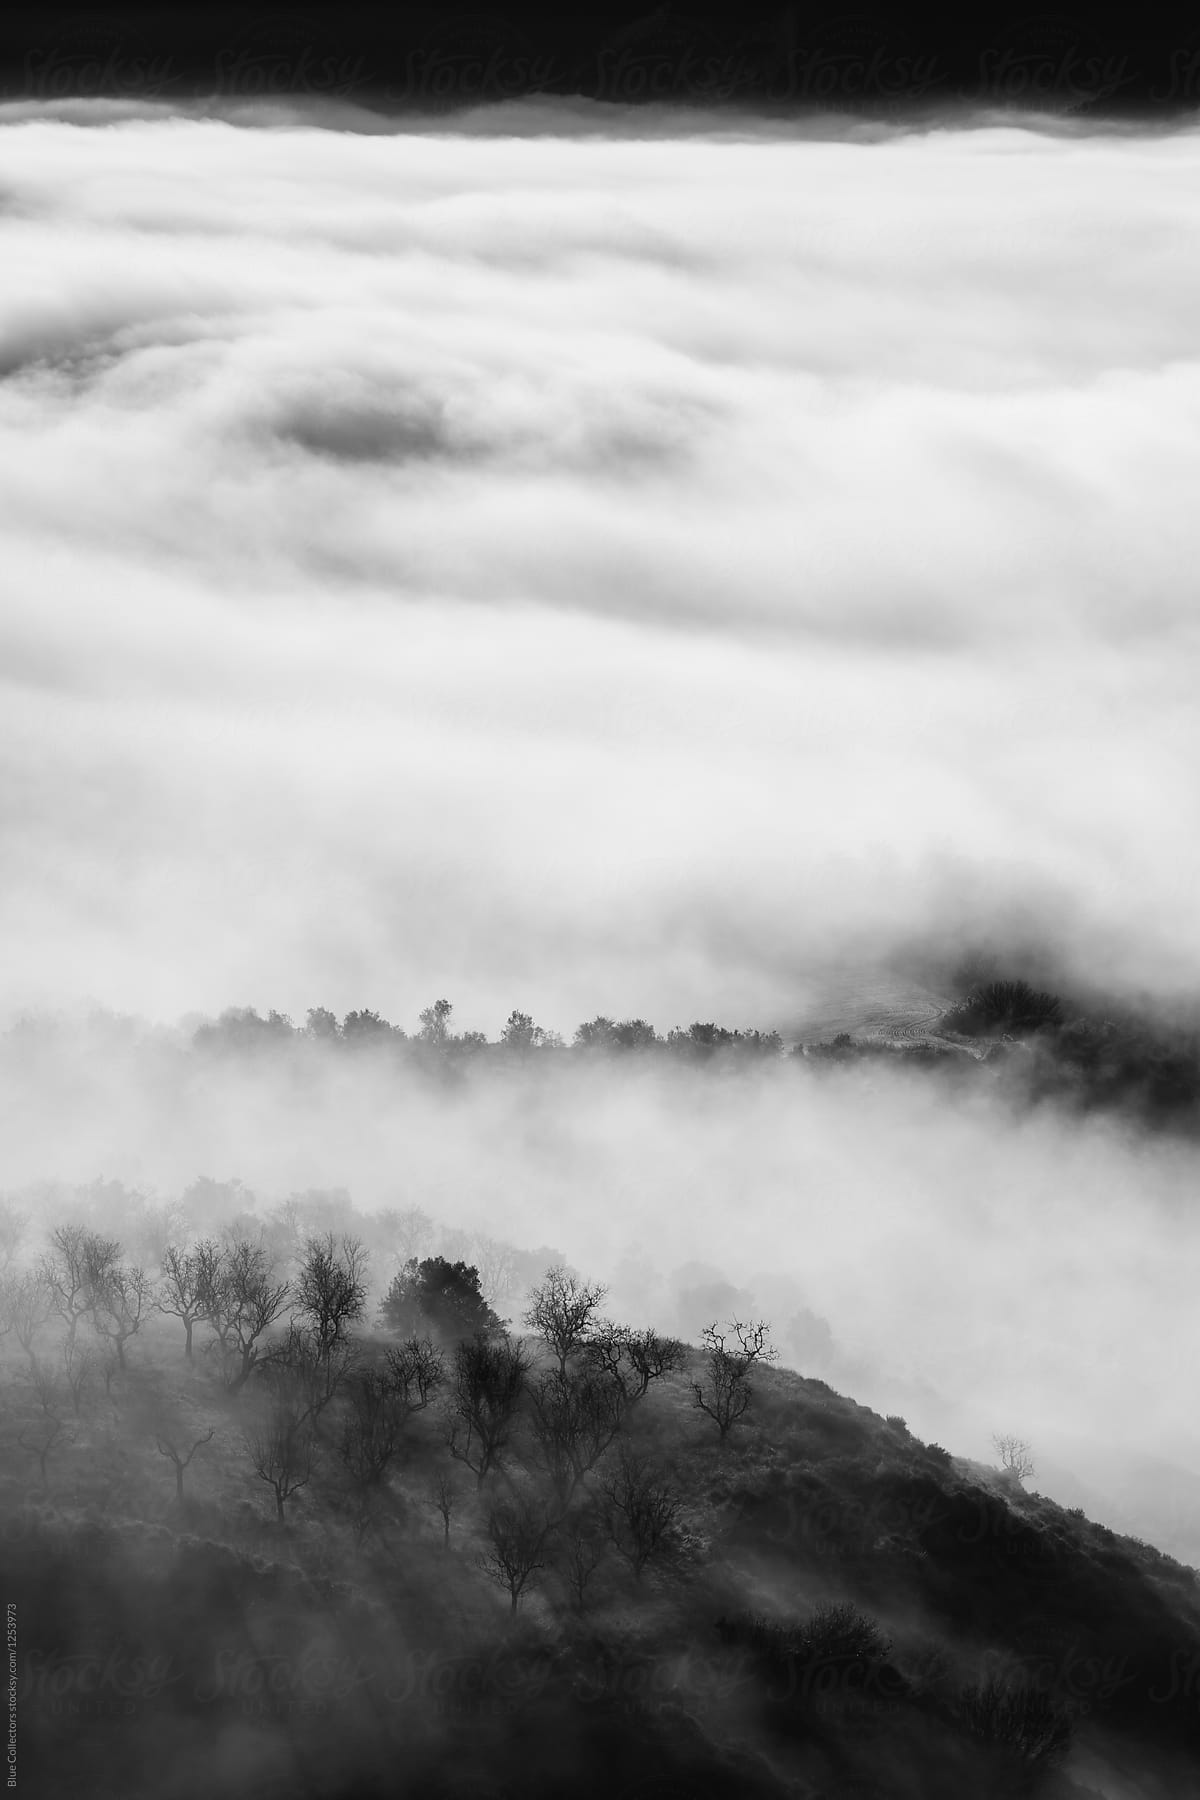 Landscapes of trees and mountains In The Morning Mist, black and white